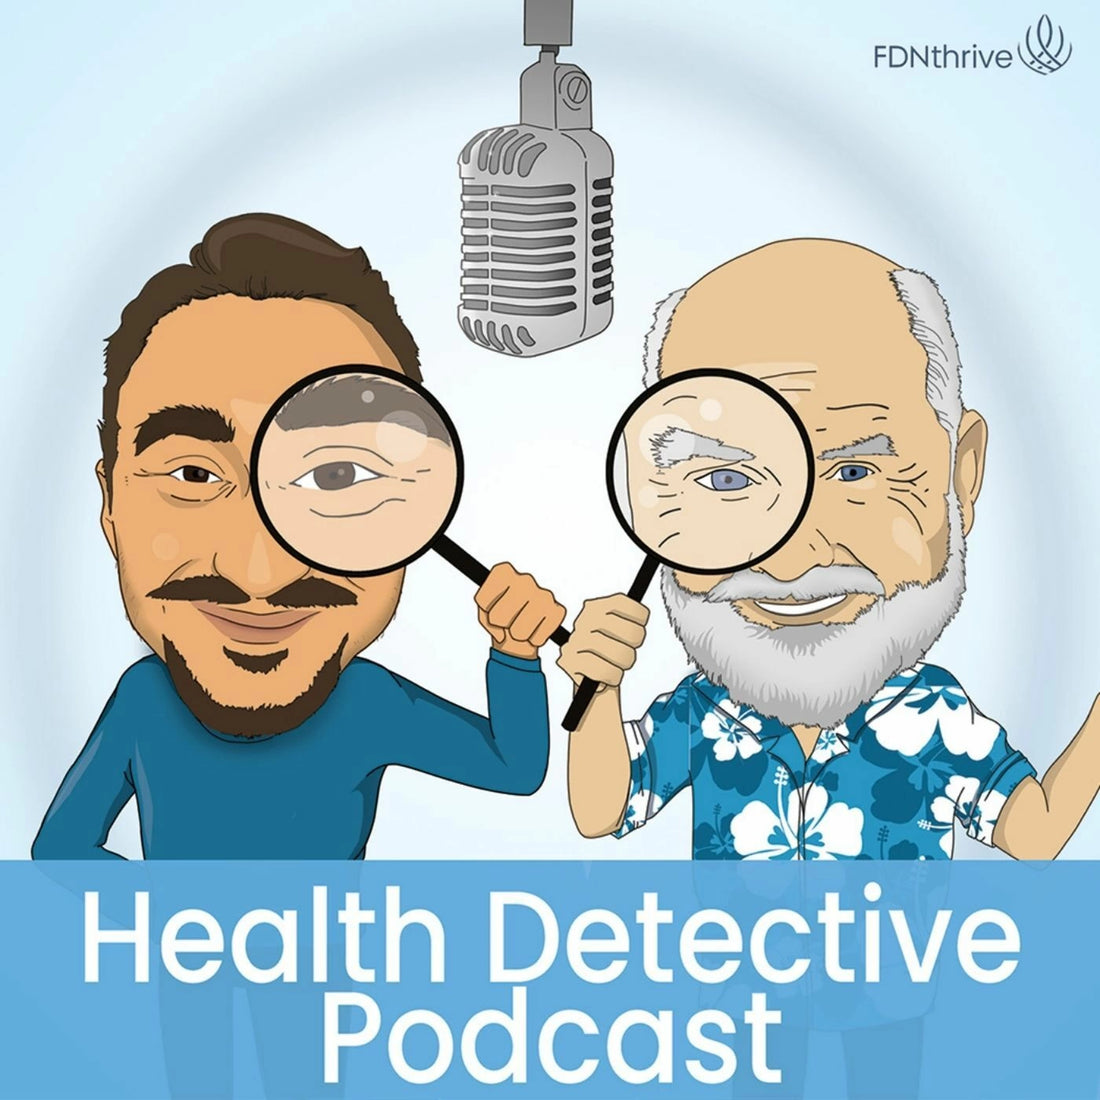 Health Detective Podcast with Steven Abbey